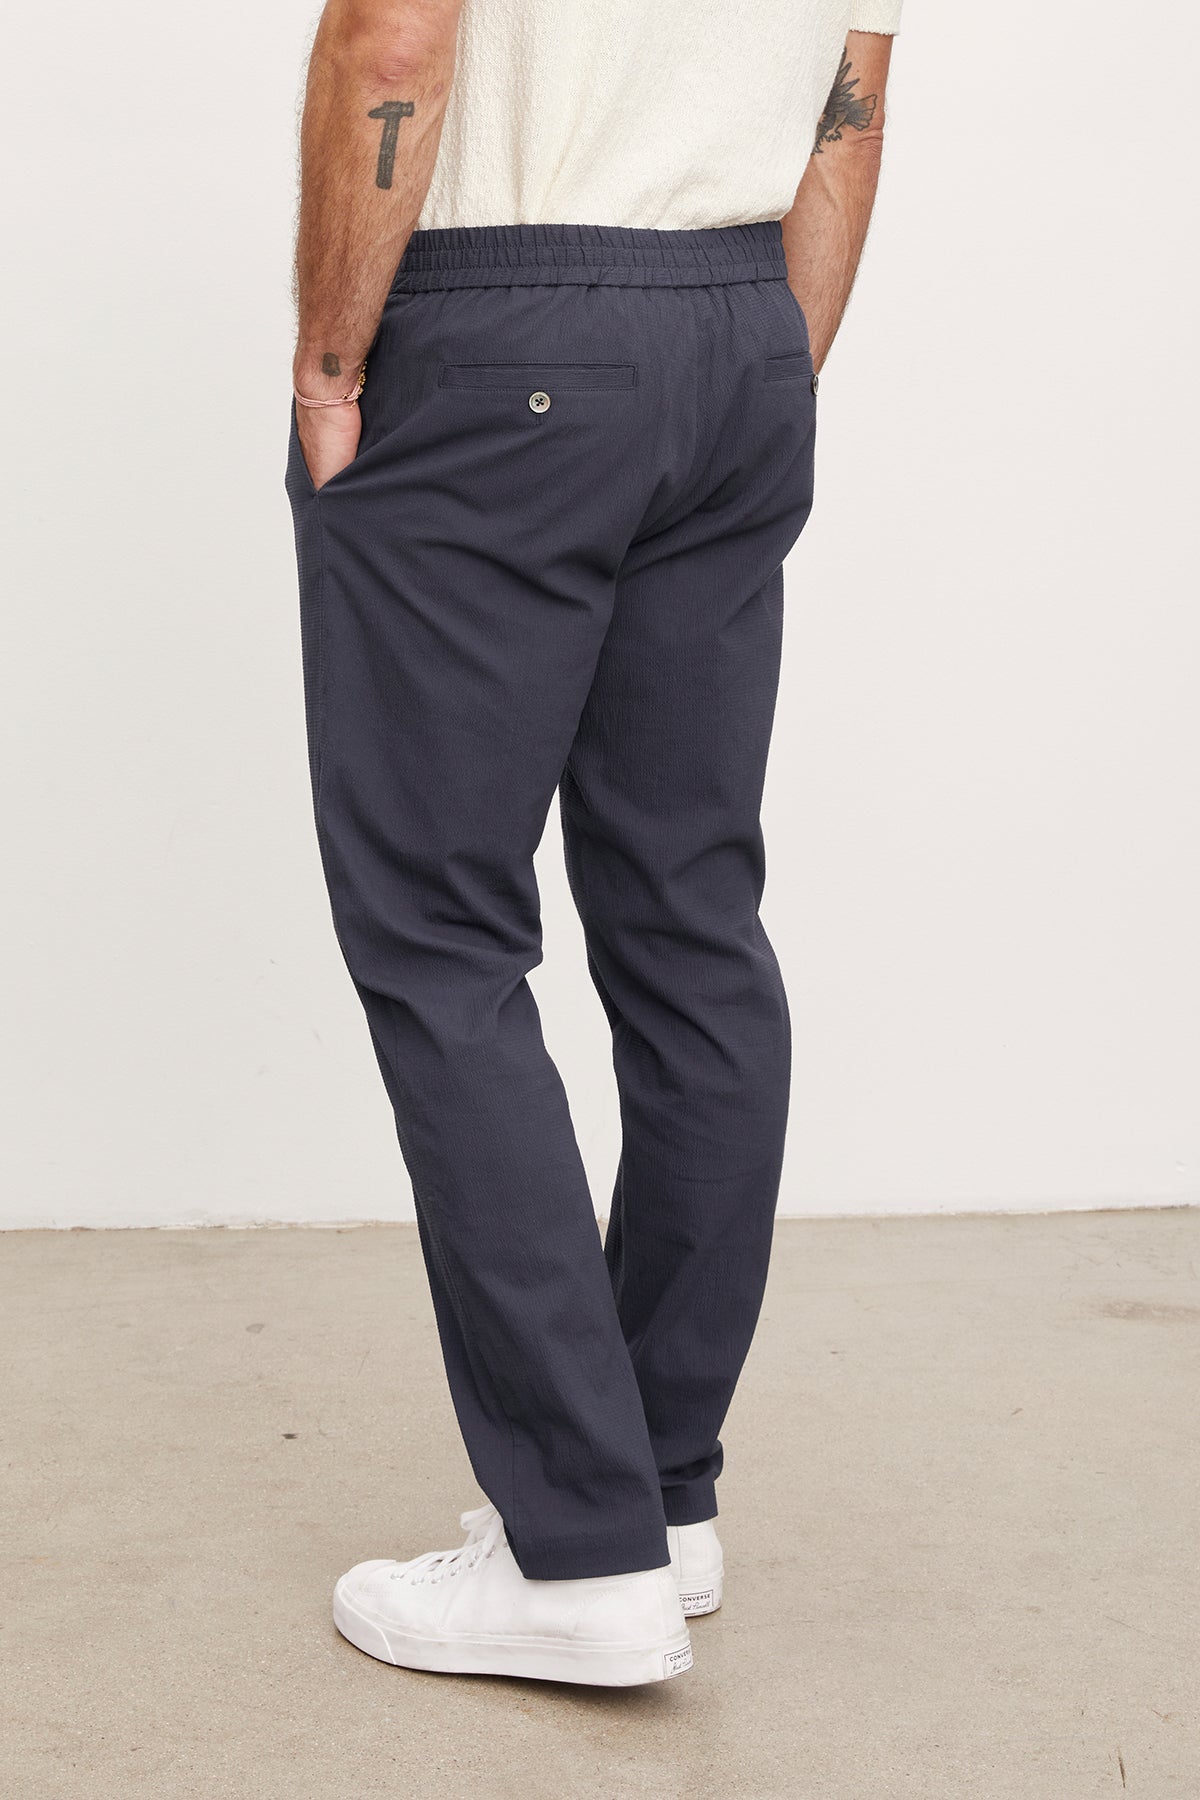 A man wearing dark blue seersucker cotton WILLEM PANTS by Velvet by Graham & Spencer and white sneakers, viewed from the side, focusing on the trouser fit and details.-36909304709313